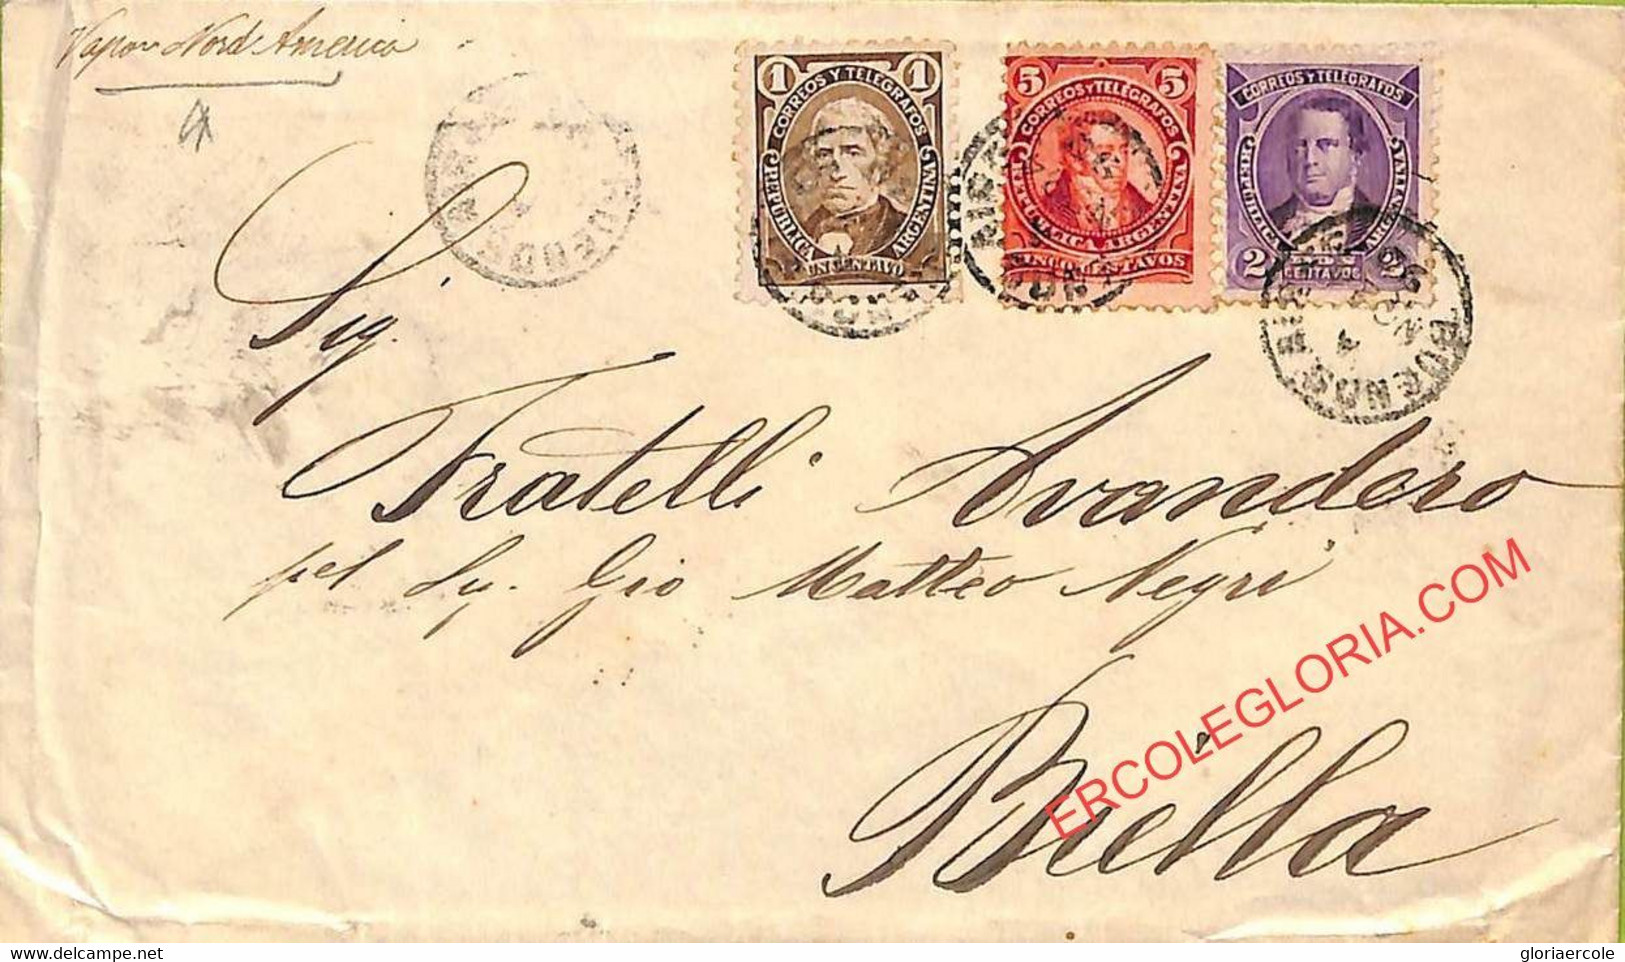 Ad6082 - ARGENTINA - POSTAL HISTORY - 3 Colour Franking COVER To ARGENTINA 1890 - Covers & Documents